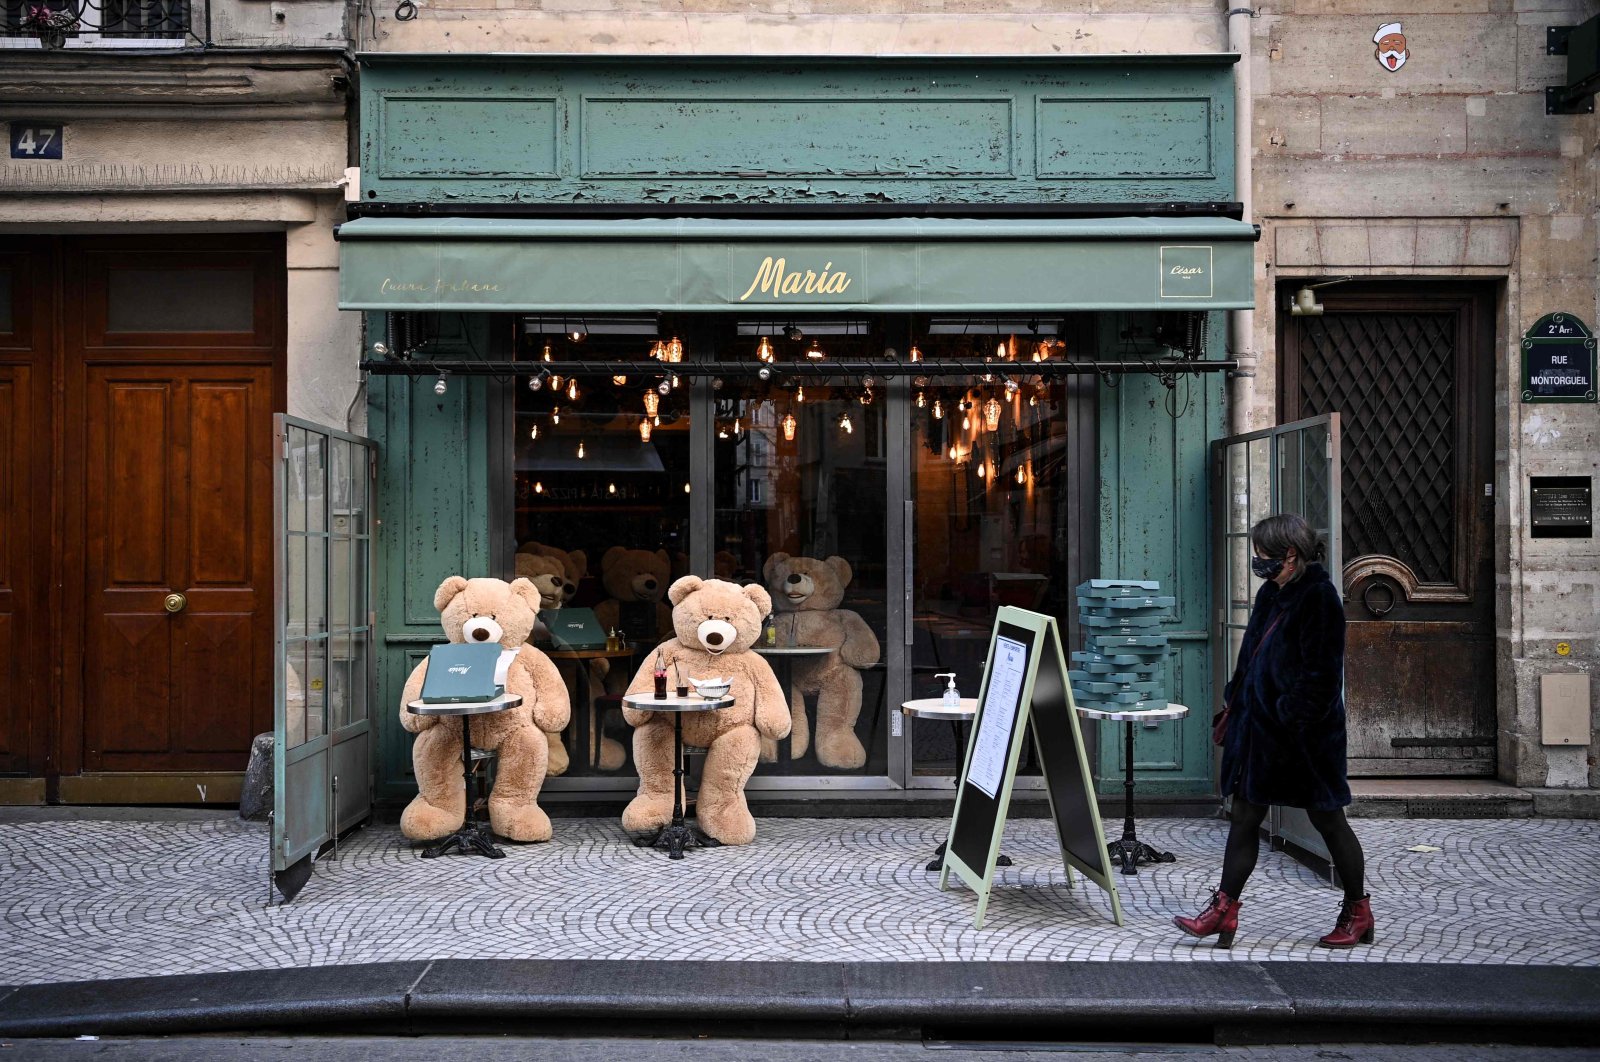 A woman walks in front of teddy bears displayed on the terrace of a closed restaurant in Paris, France, March 20, 2021. (AFP Photo)